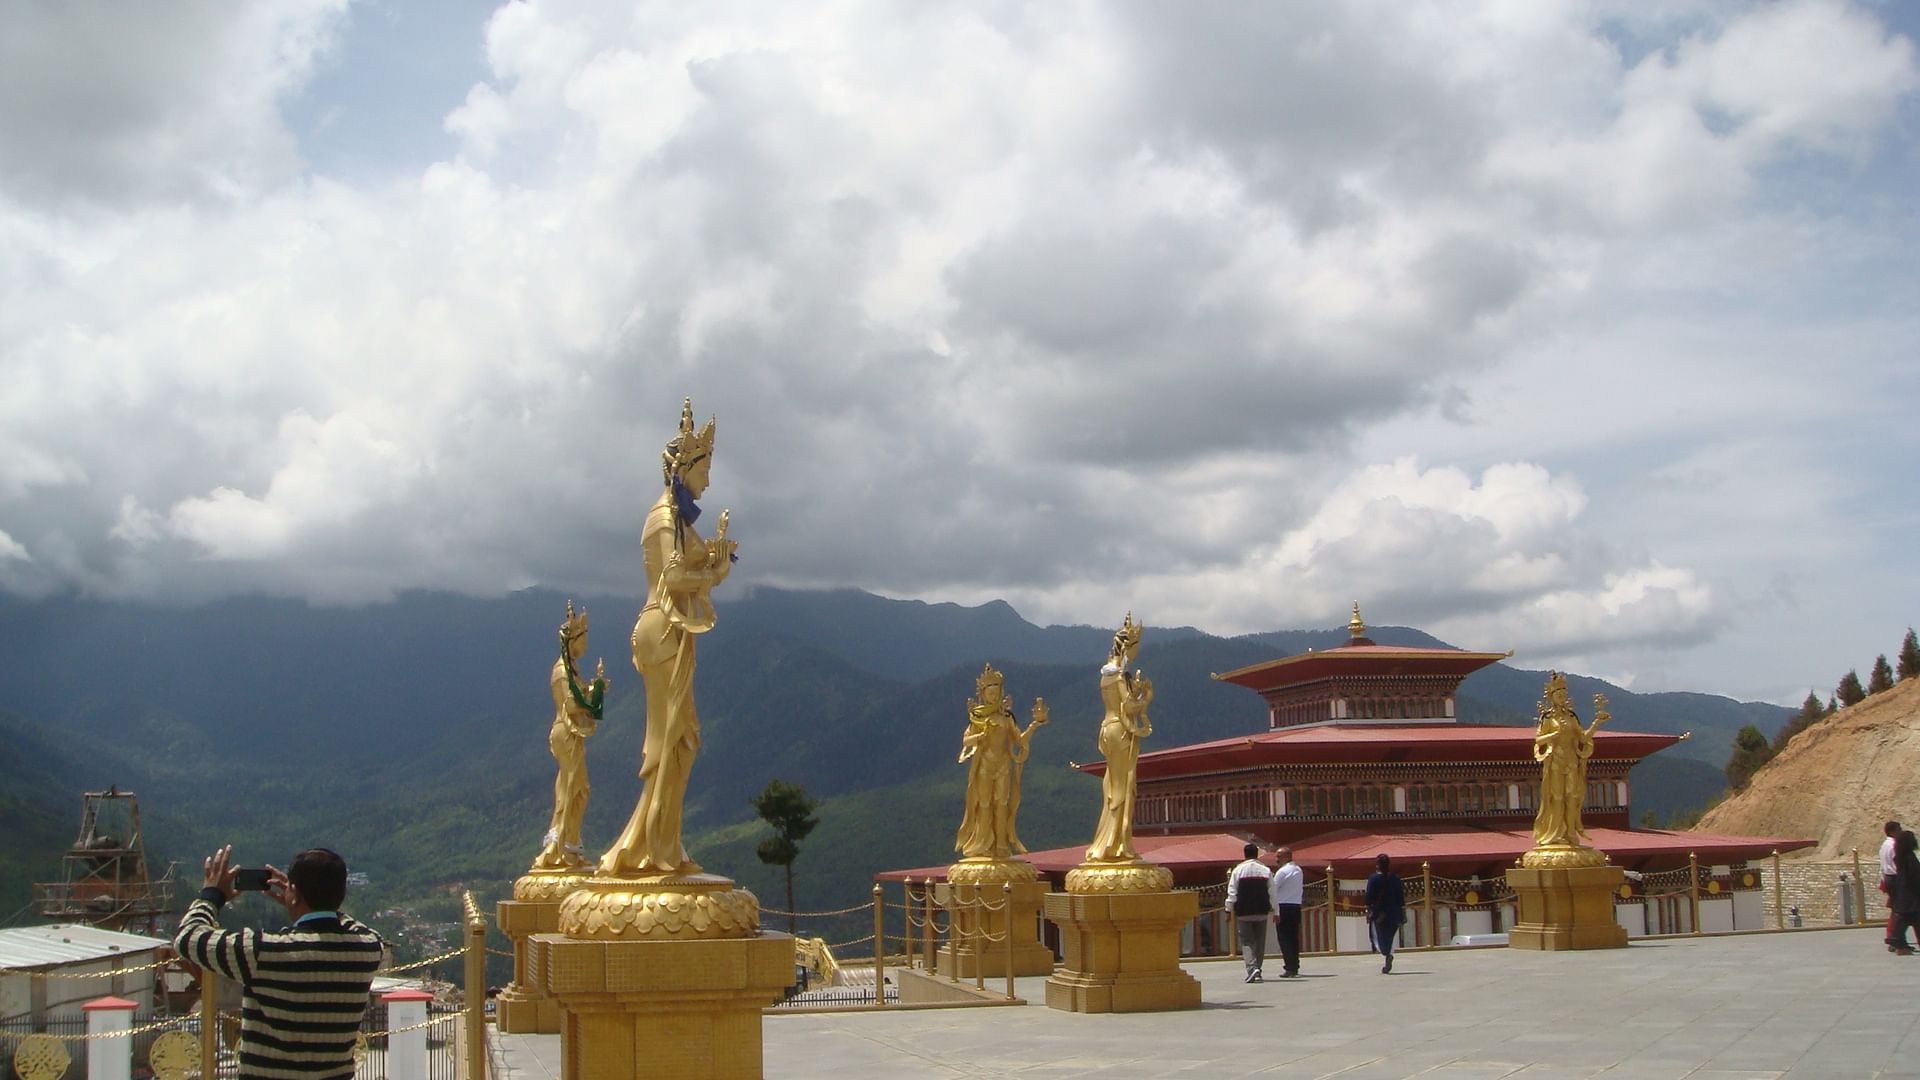 Bhutan is a land-locked country with scenic hills and valleys, Dzongs, stupas and statues of Buddha.